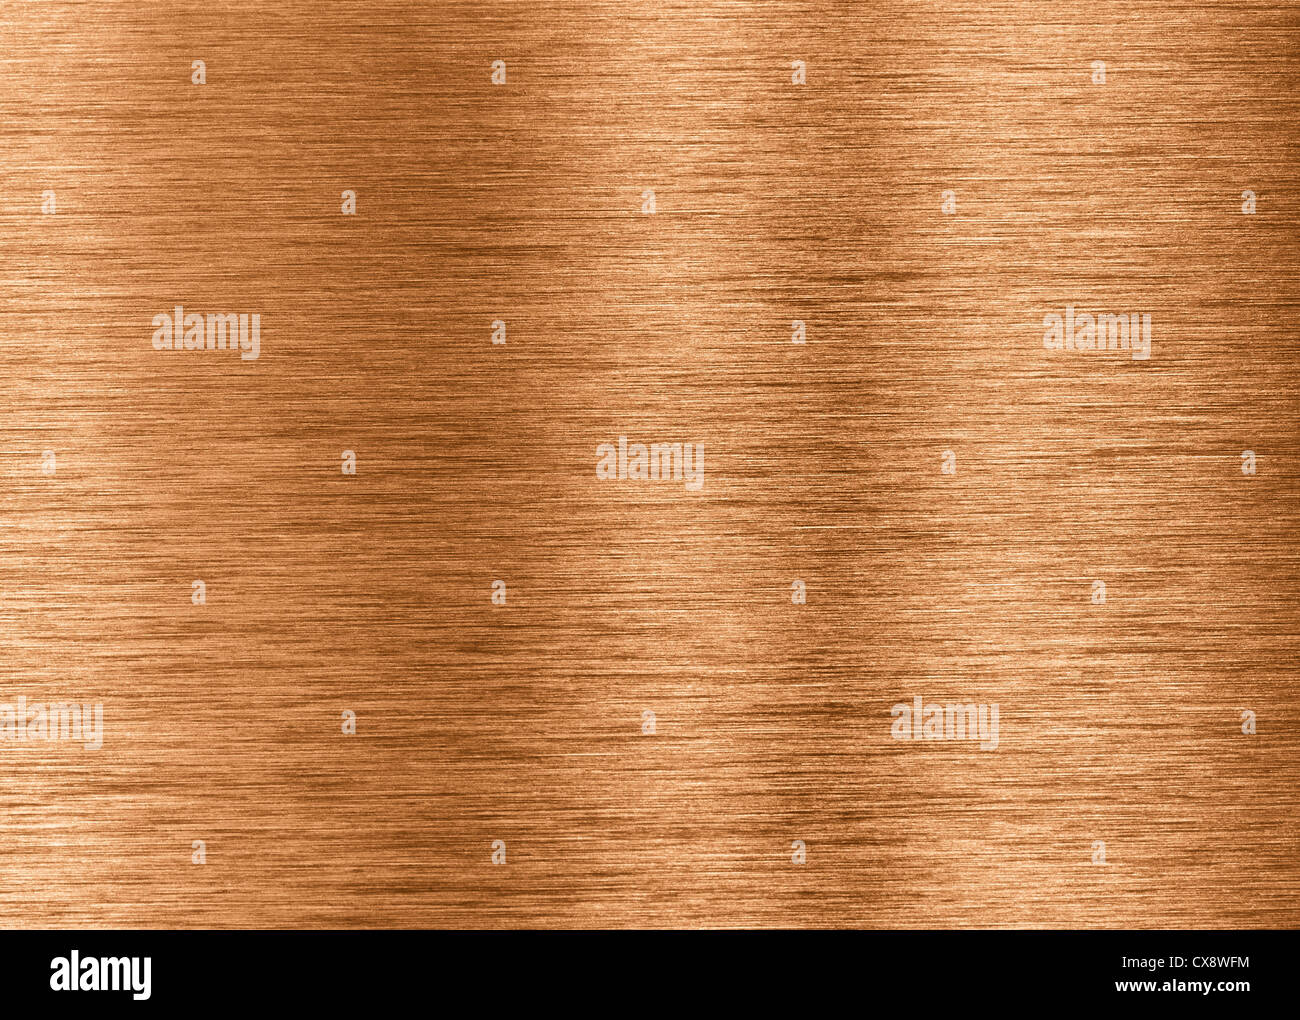 Bronze or Copper Metal Texture Background Stock Image - Image of